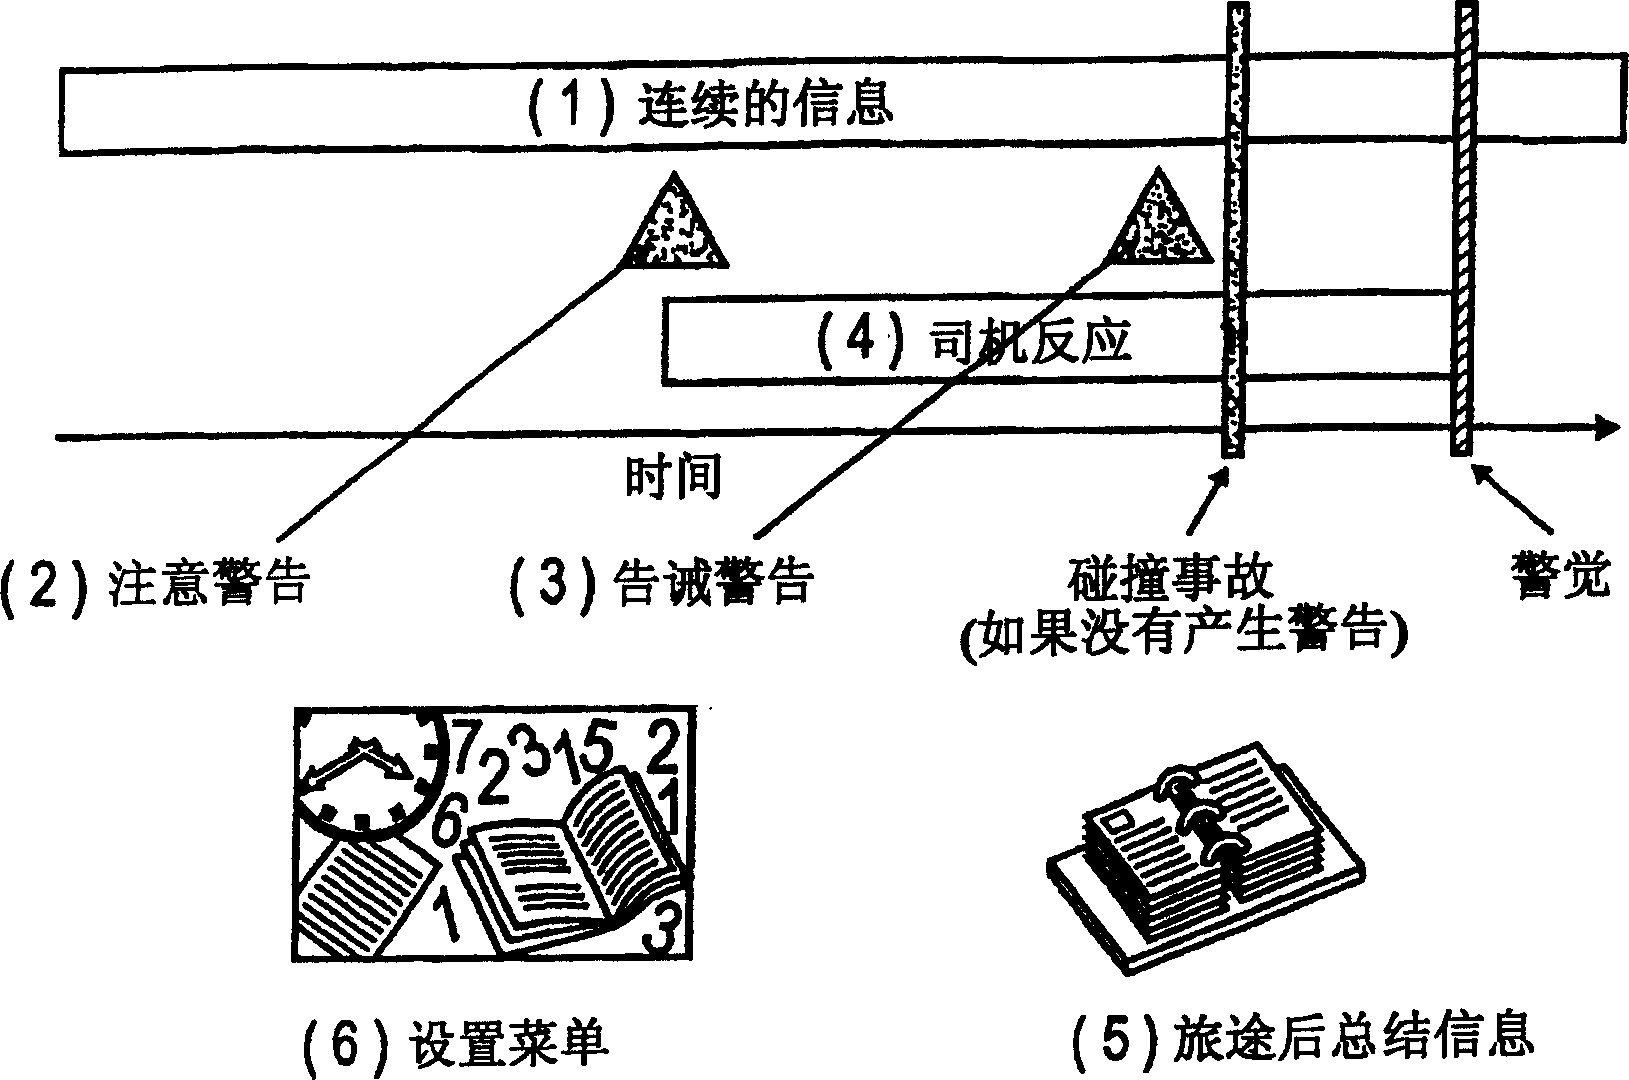 System and method for monitoring and managing driver attention loads